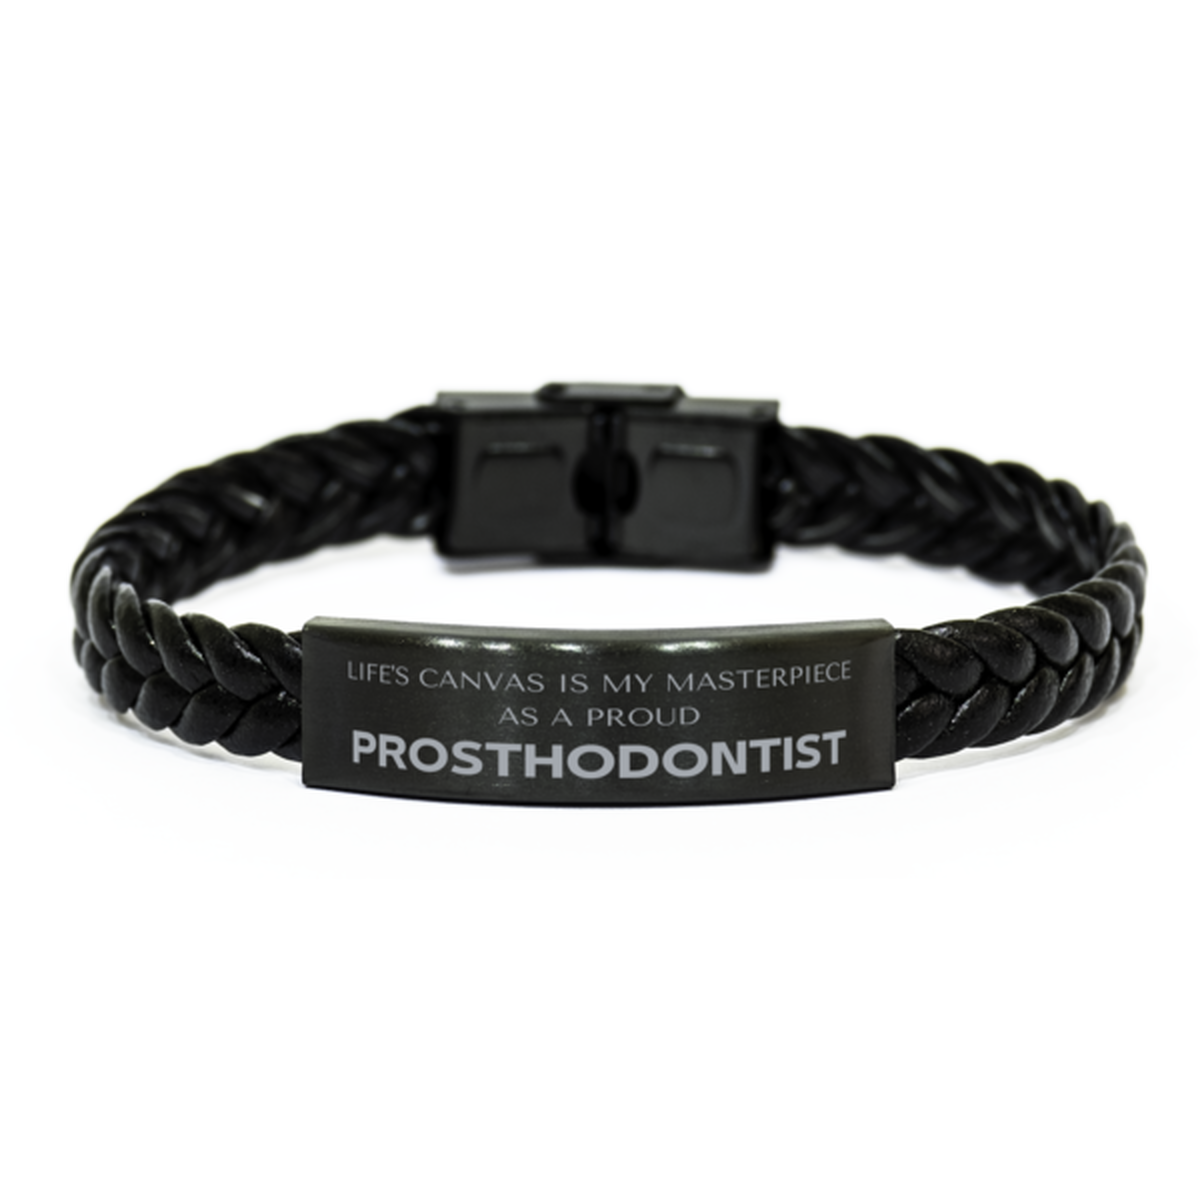 Proud Prosthodontist Gifts, Life's canvas is my masterpiece, Epic Birthday Christmas Unique Braided Leather Bracelet For Prosthodontist, Coworkers, Men, Women, Friends